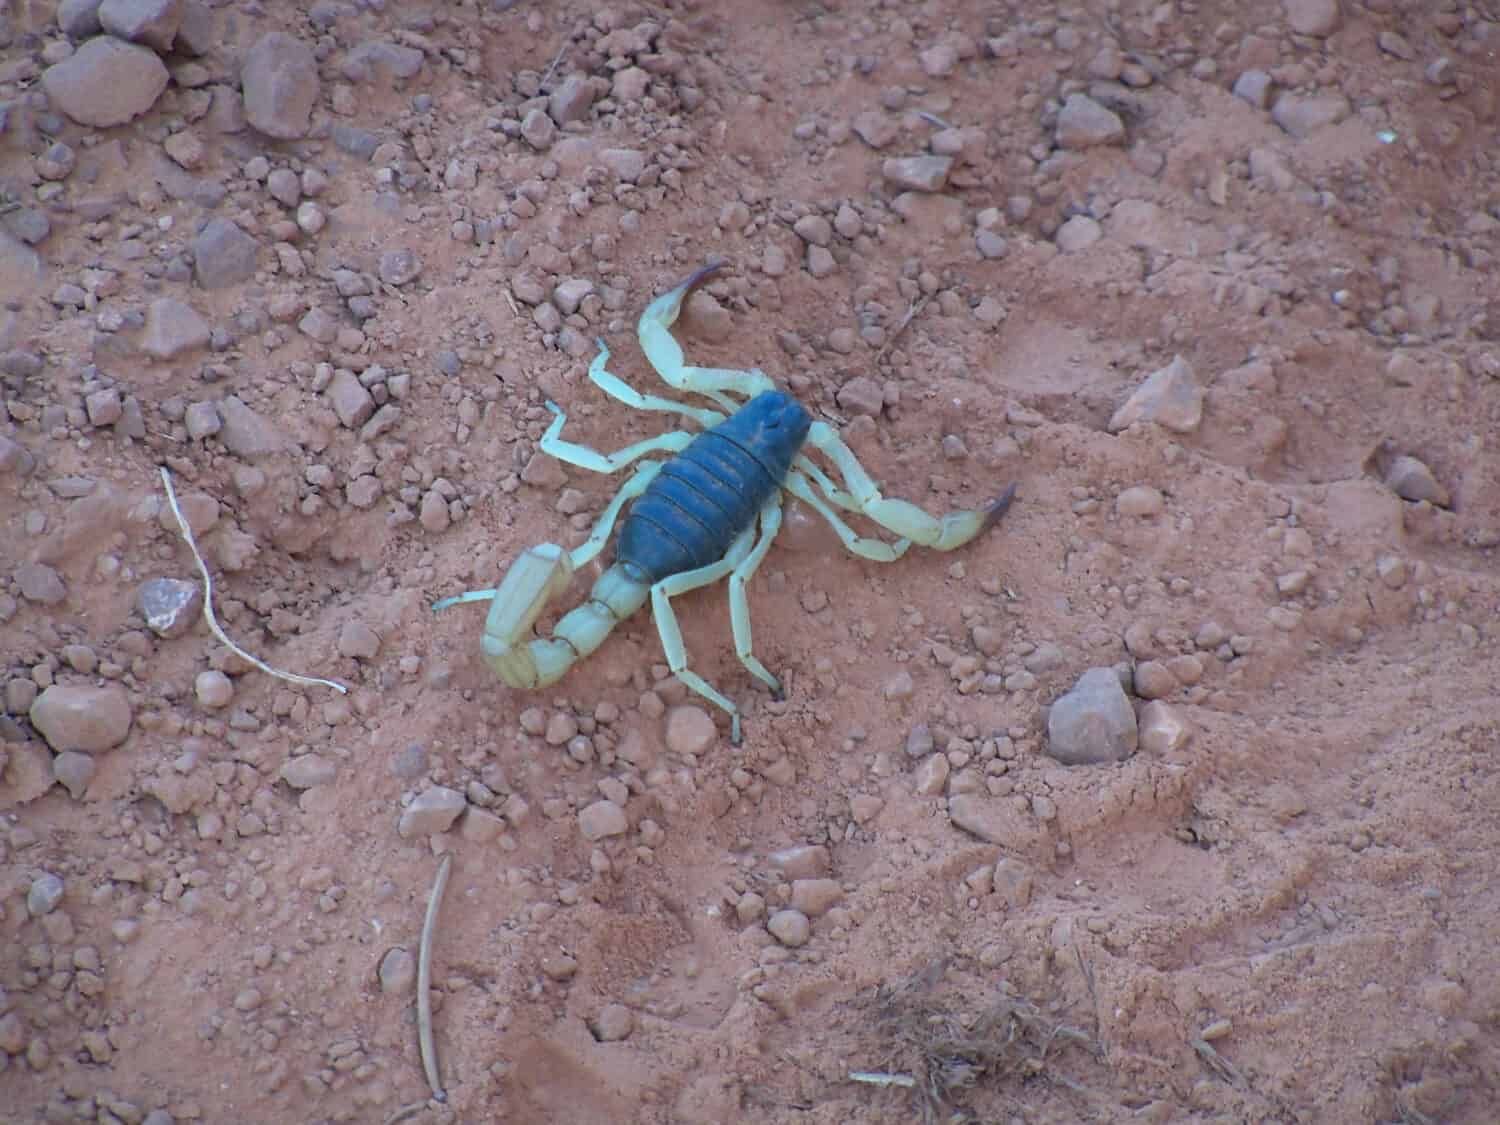 Scorpion in the Grand Canyon